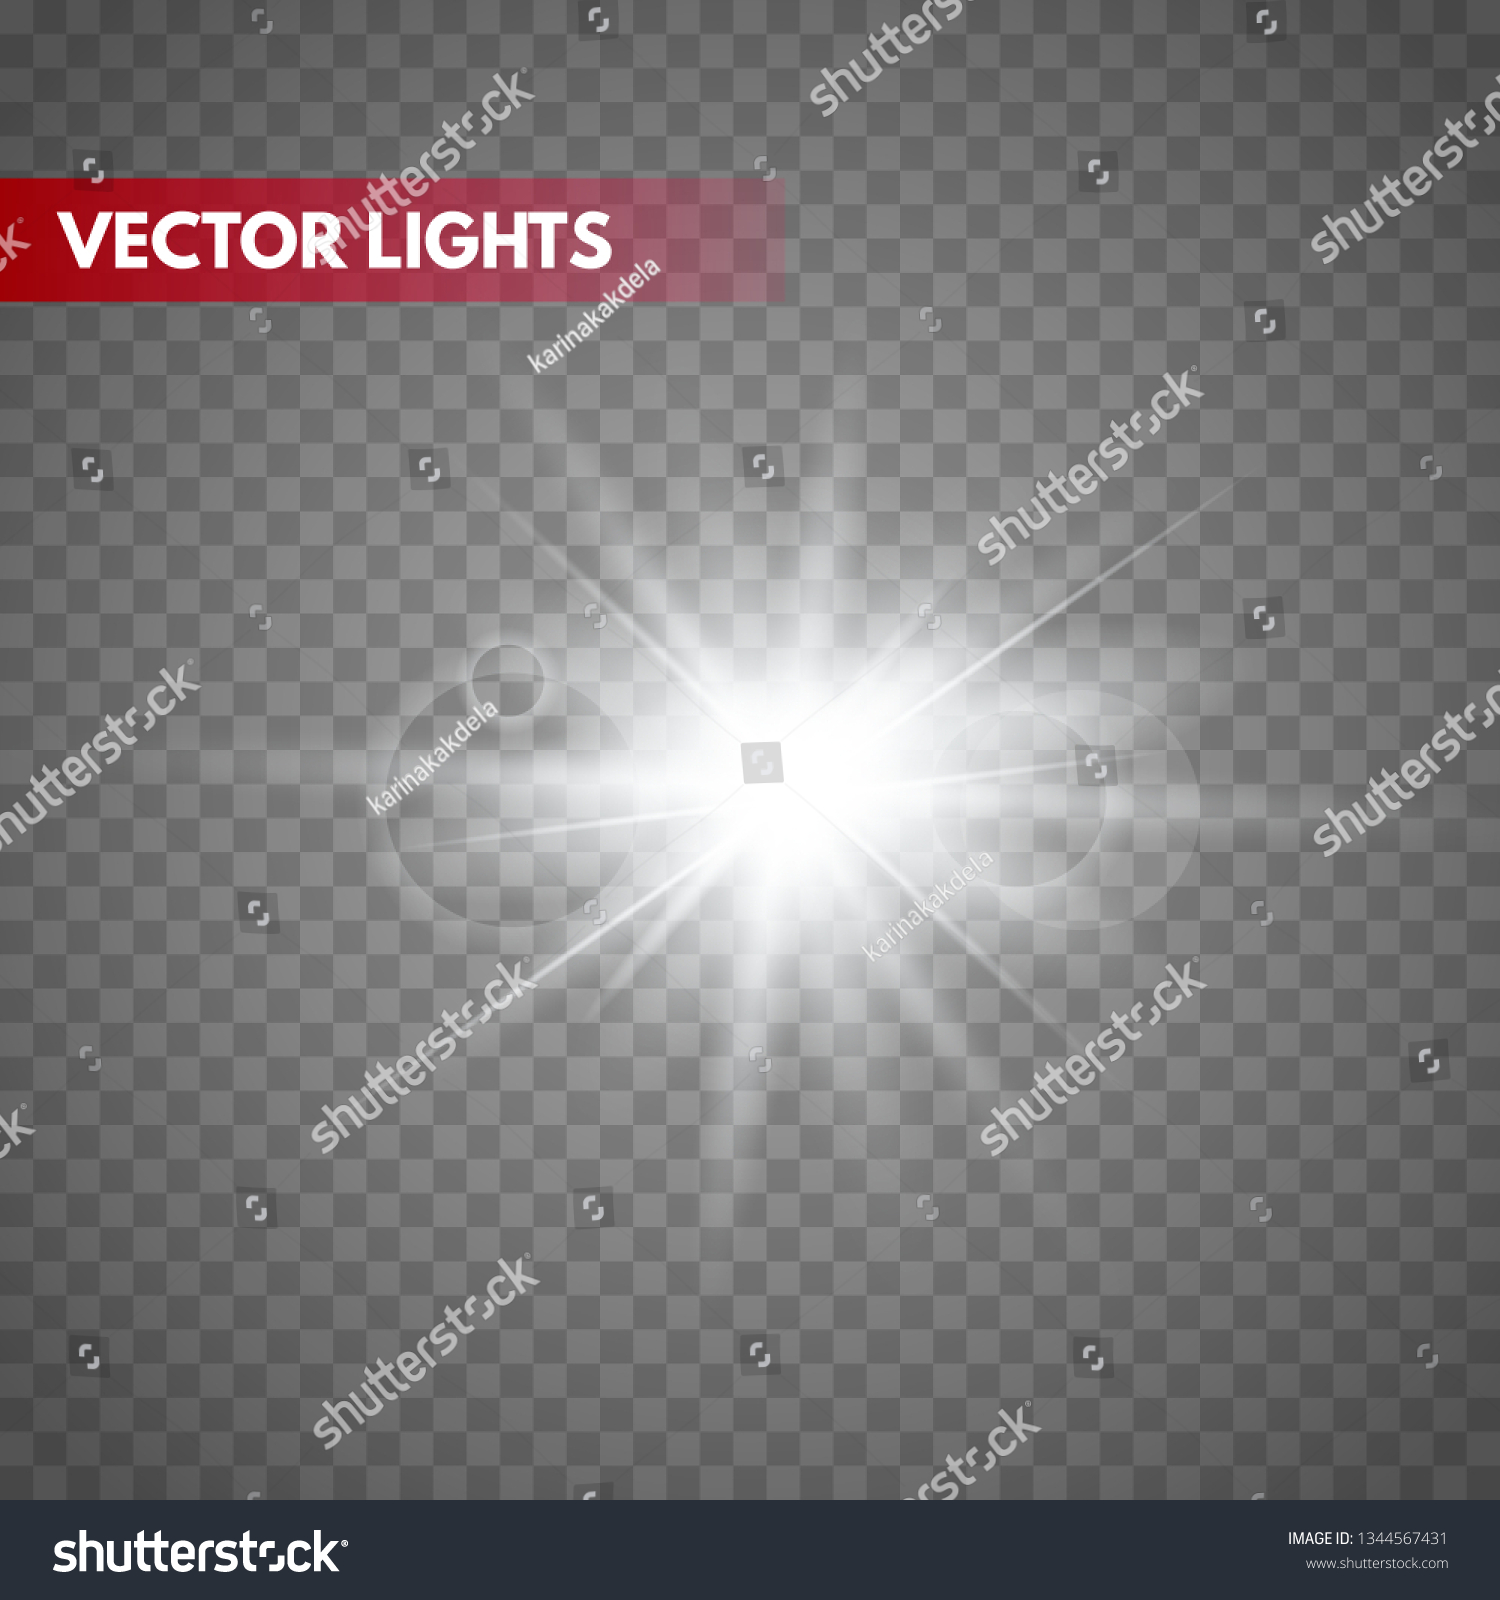 Glowing Light Effect On Transparent Backgroundvector Stock Vector ...